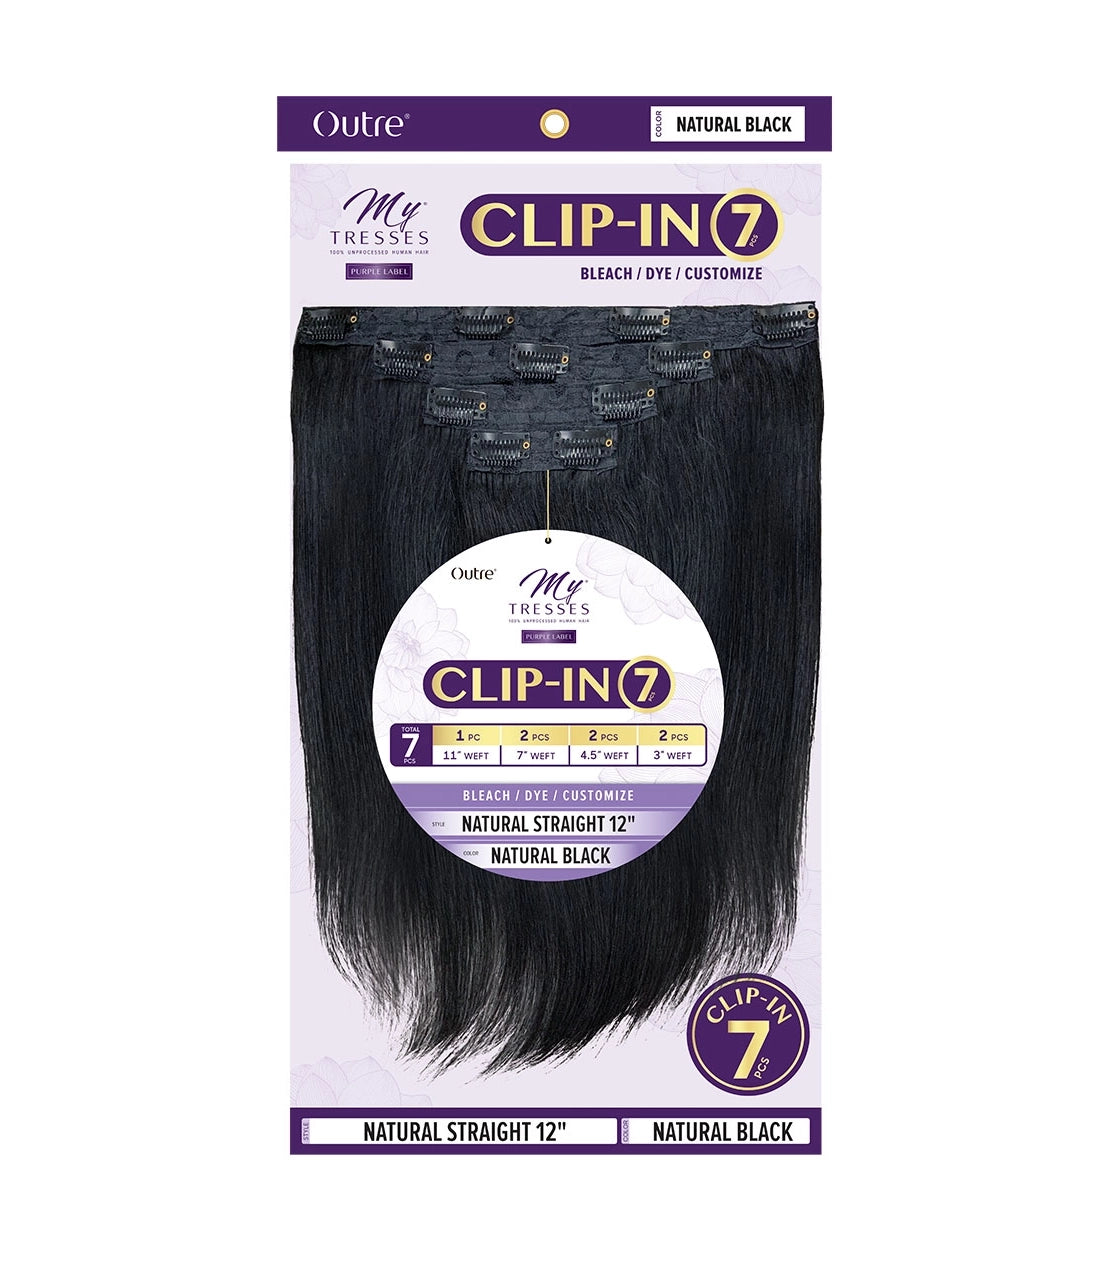 Outre® My Tresses (7 pcs) Natural Straight Clip-in